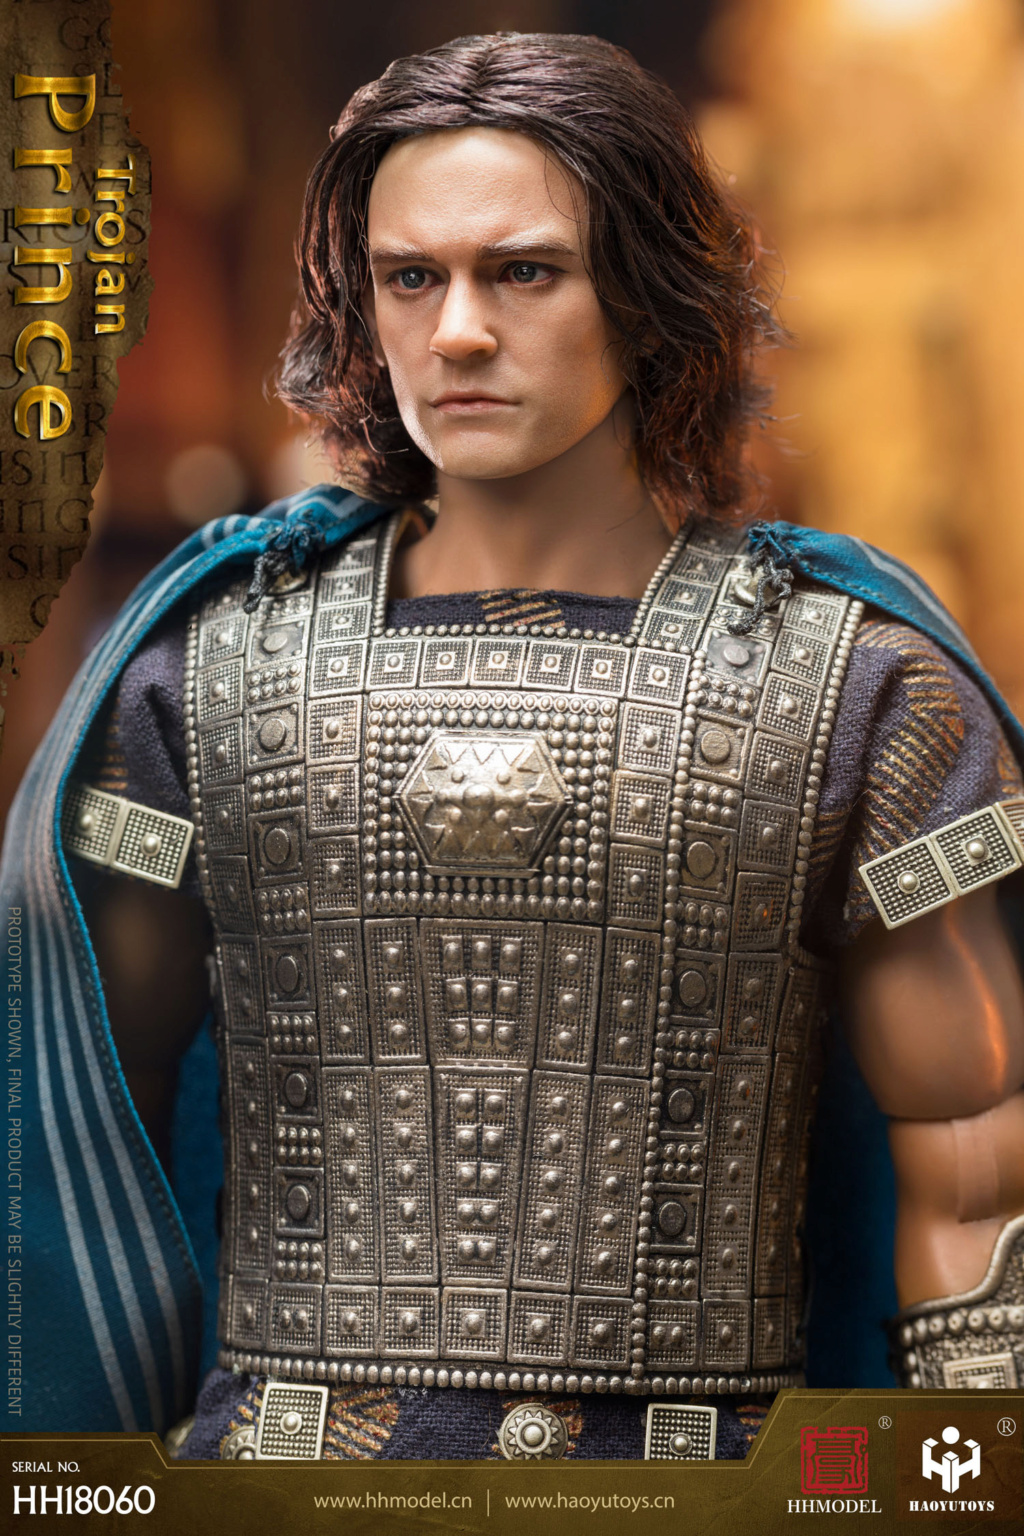 movie-based - NEW PRODUCT: HHMODEL & HAOYUTOYS: 1/6 Empire Legion - Troy Prince Action Figure #HH18060 16280110